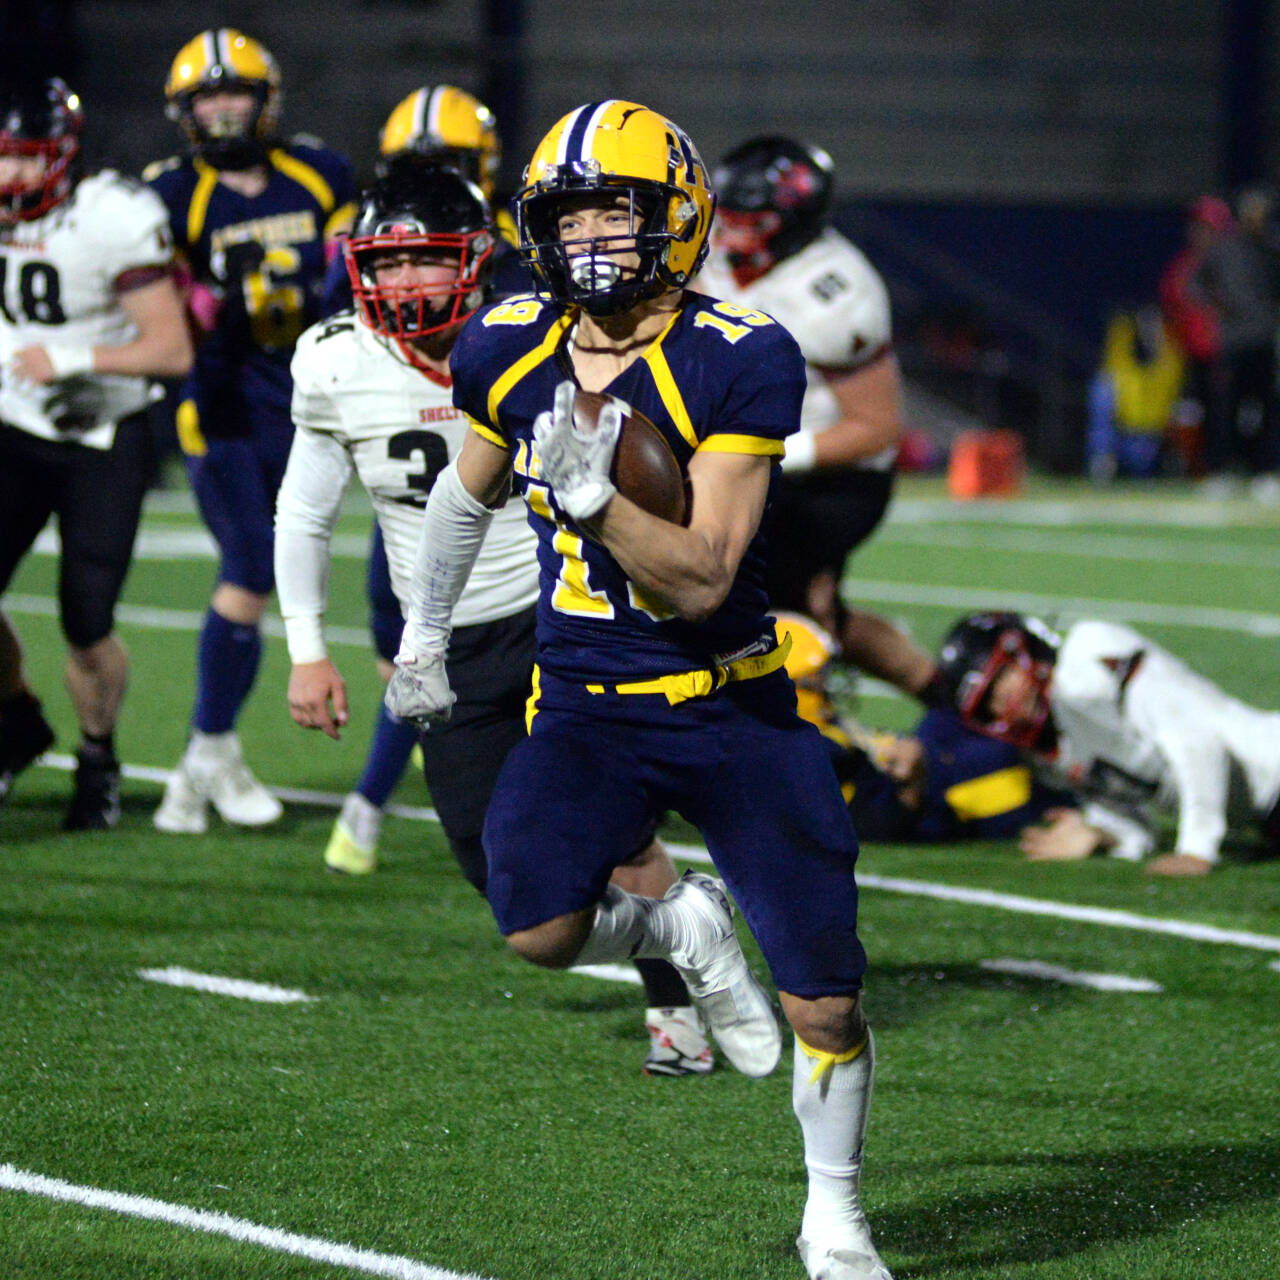 DAILY WORLD FILE PHOTO 
Aberdeen running back Aidan Watkins, seen here in a file photo from Oct. 28, and the Bobcats will travel to face Washougal in a 2A crossover playoff game on Saturday at Washougal High School.